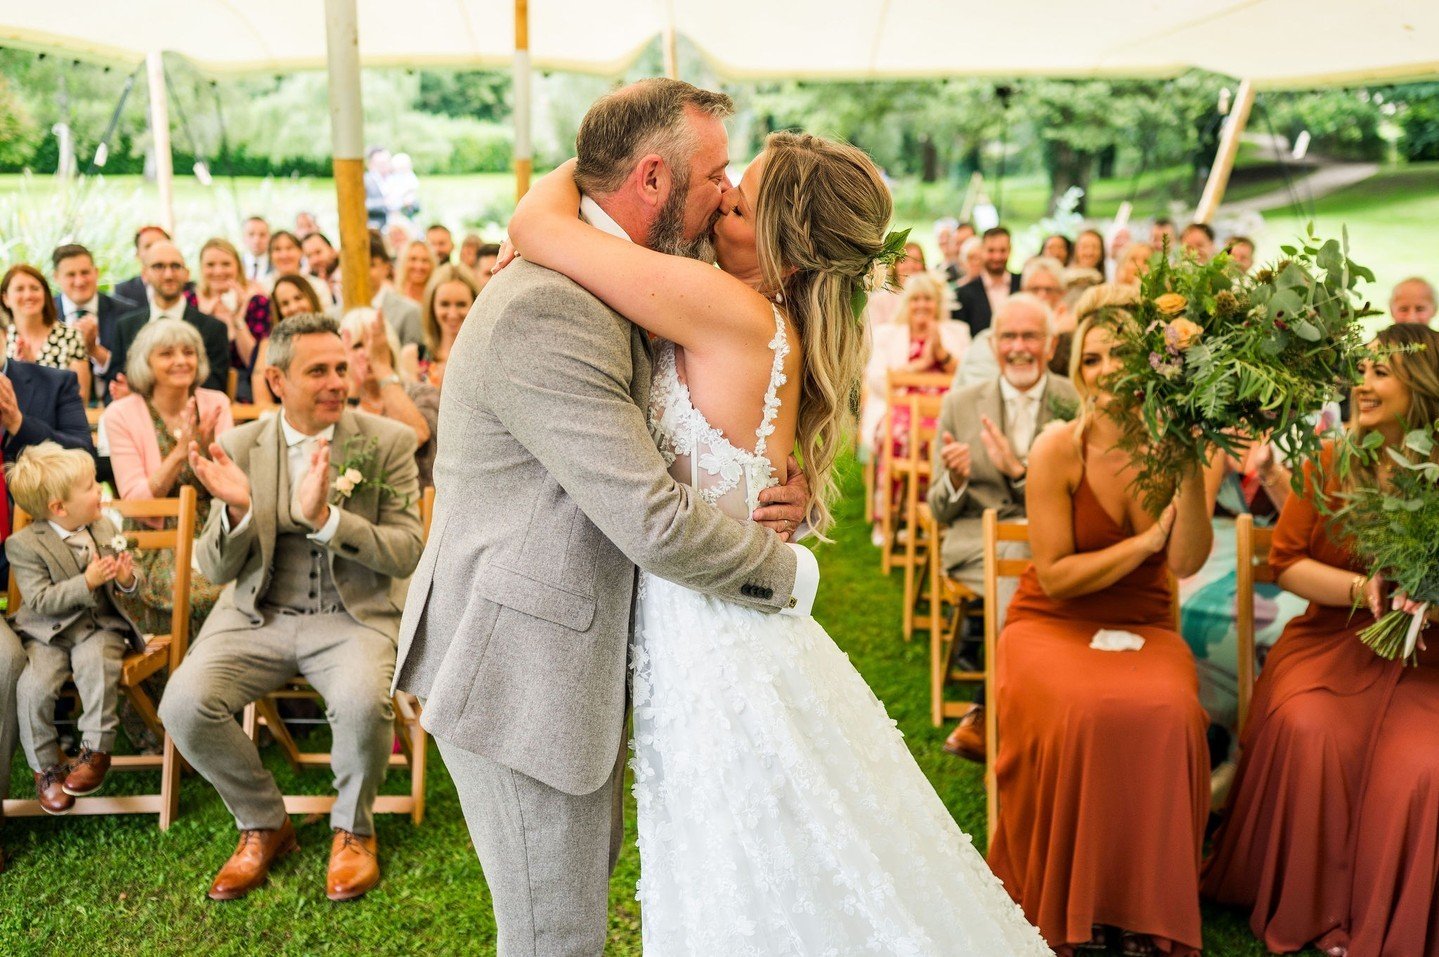 Magical moments at Waters Edge.
We're here to discuss your perfect day.

Captured by @jonnybarrattphotography

#watersedge #cotswoldwedding #cotswoldbride #luxurybride #gloucestershirevenue #gloucestershirewedding